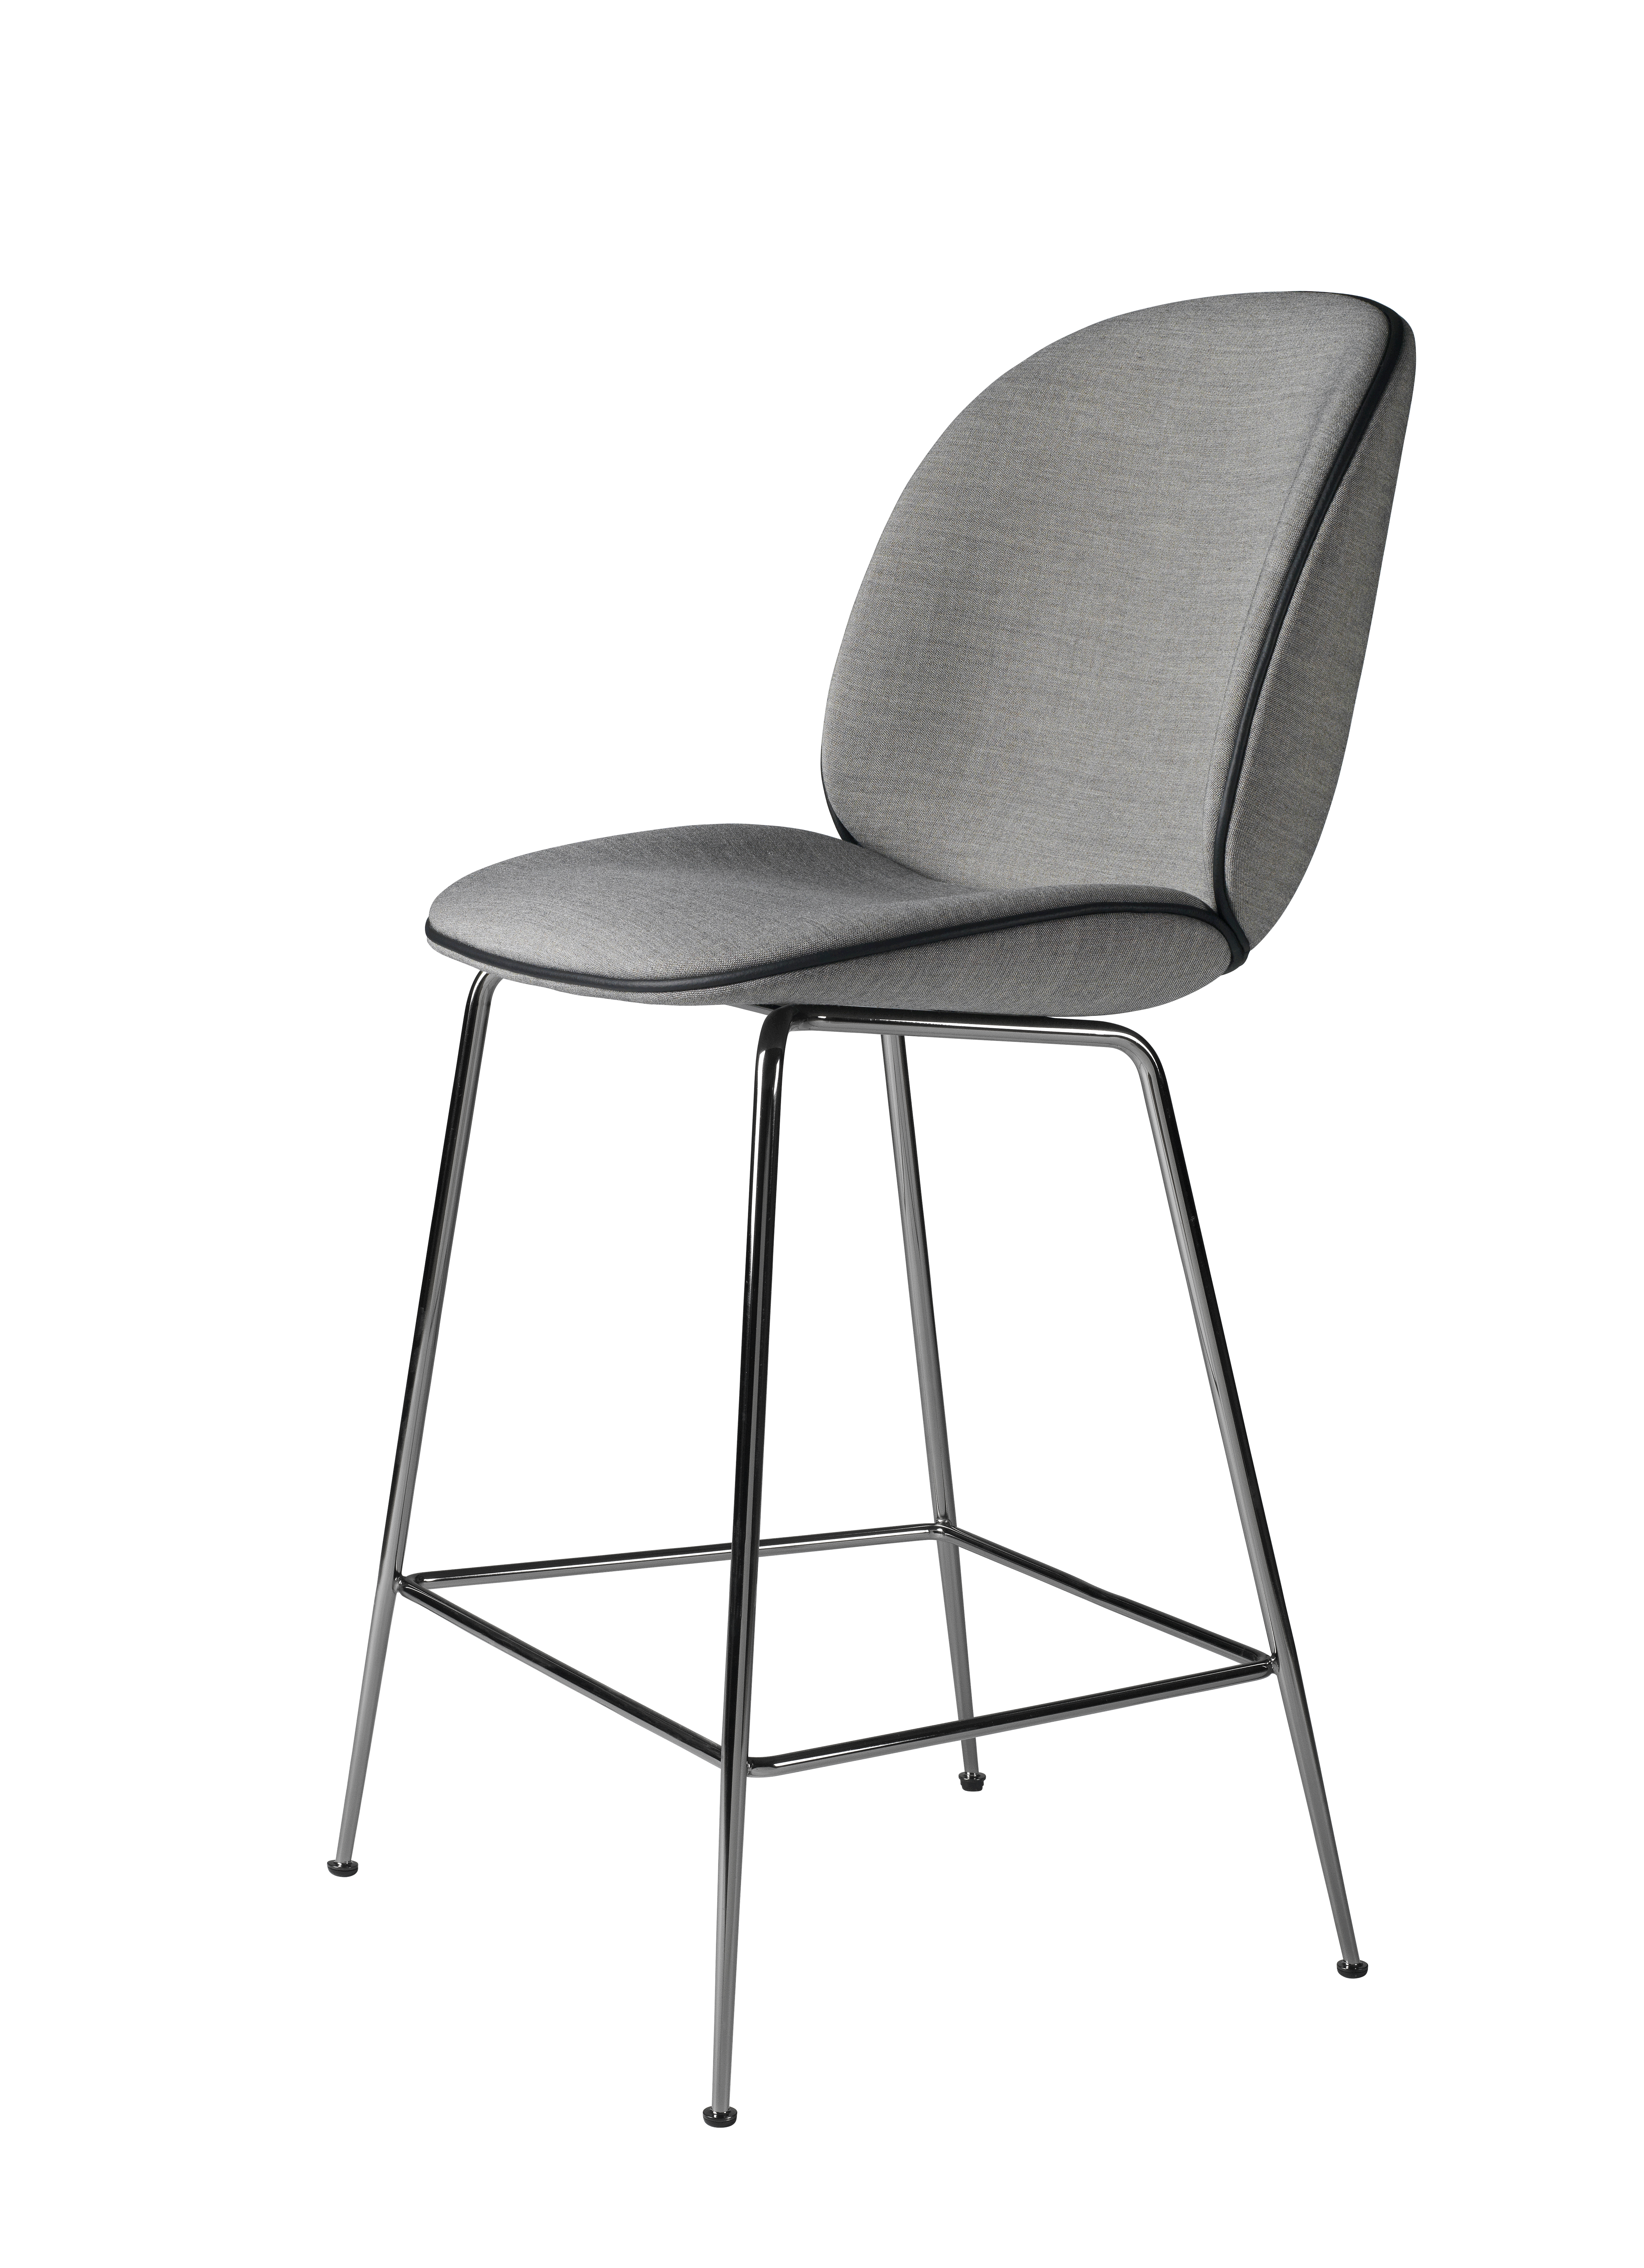 Suite NY Beetle stool